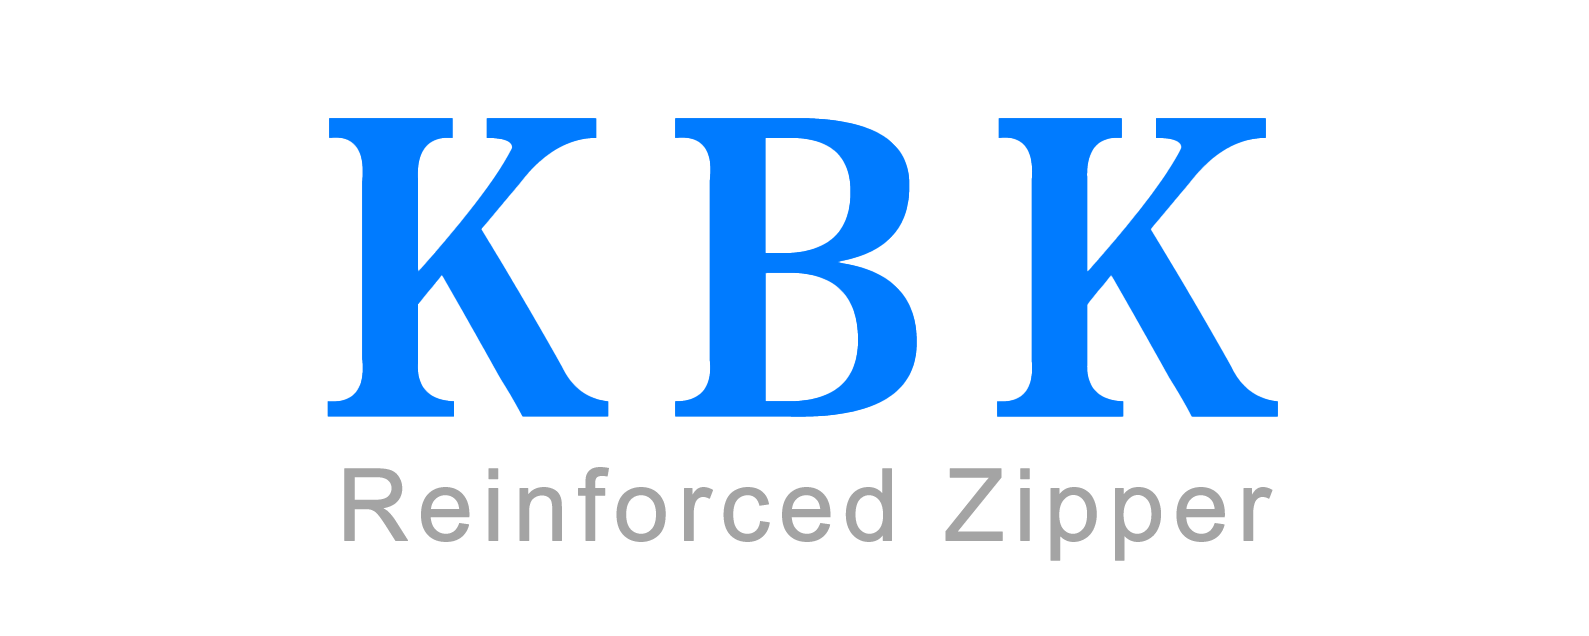 Metal Zippers Manufacturer and Suppliers - KBK